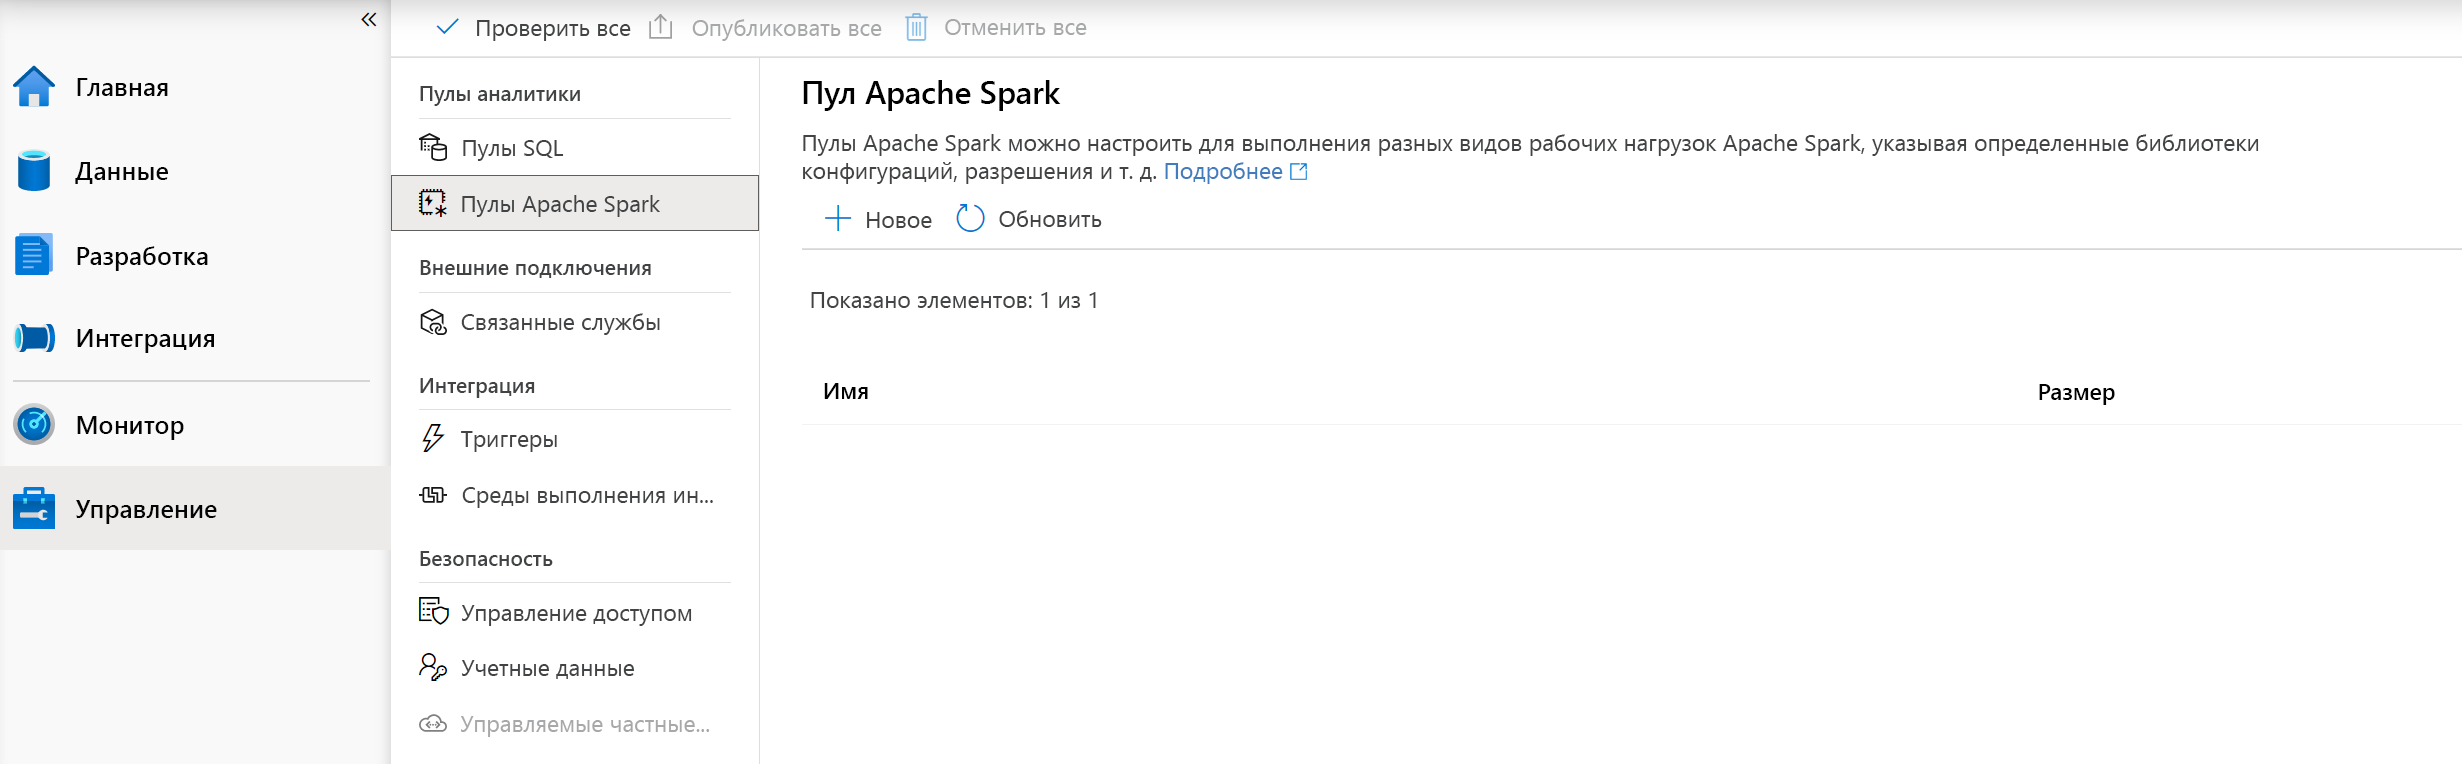 The Apache Spark Pool screen in Azure Synapse Studio